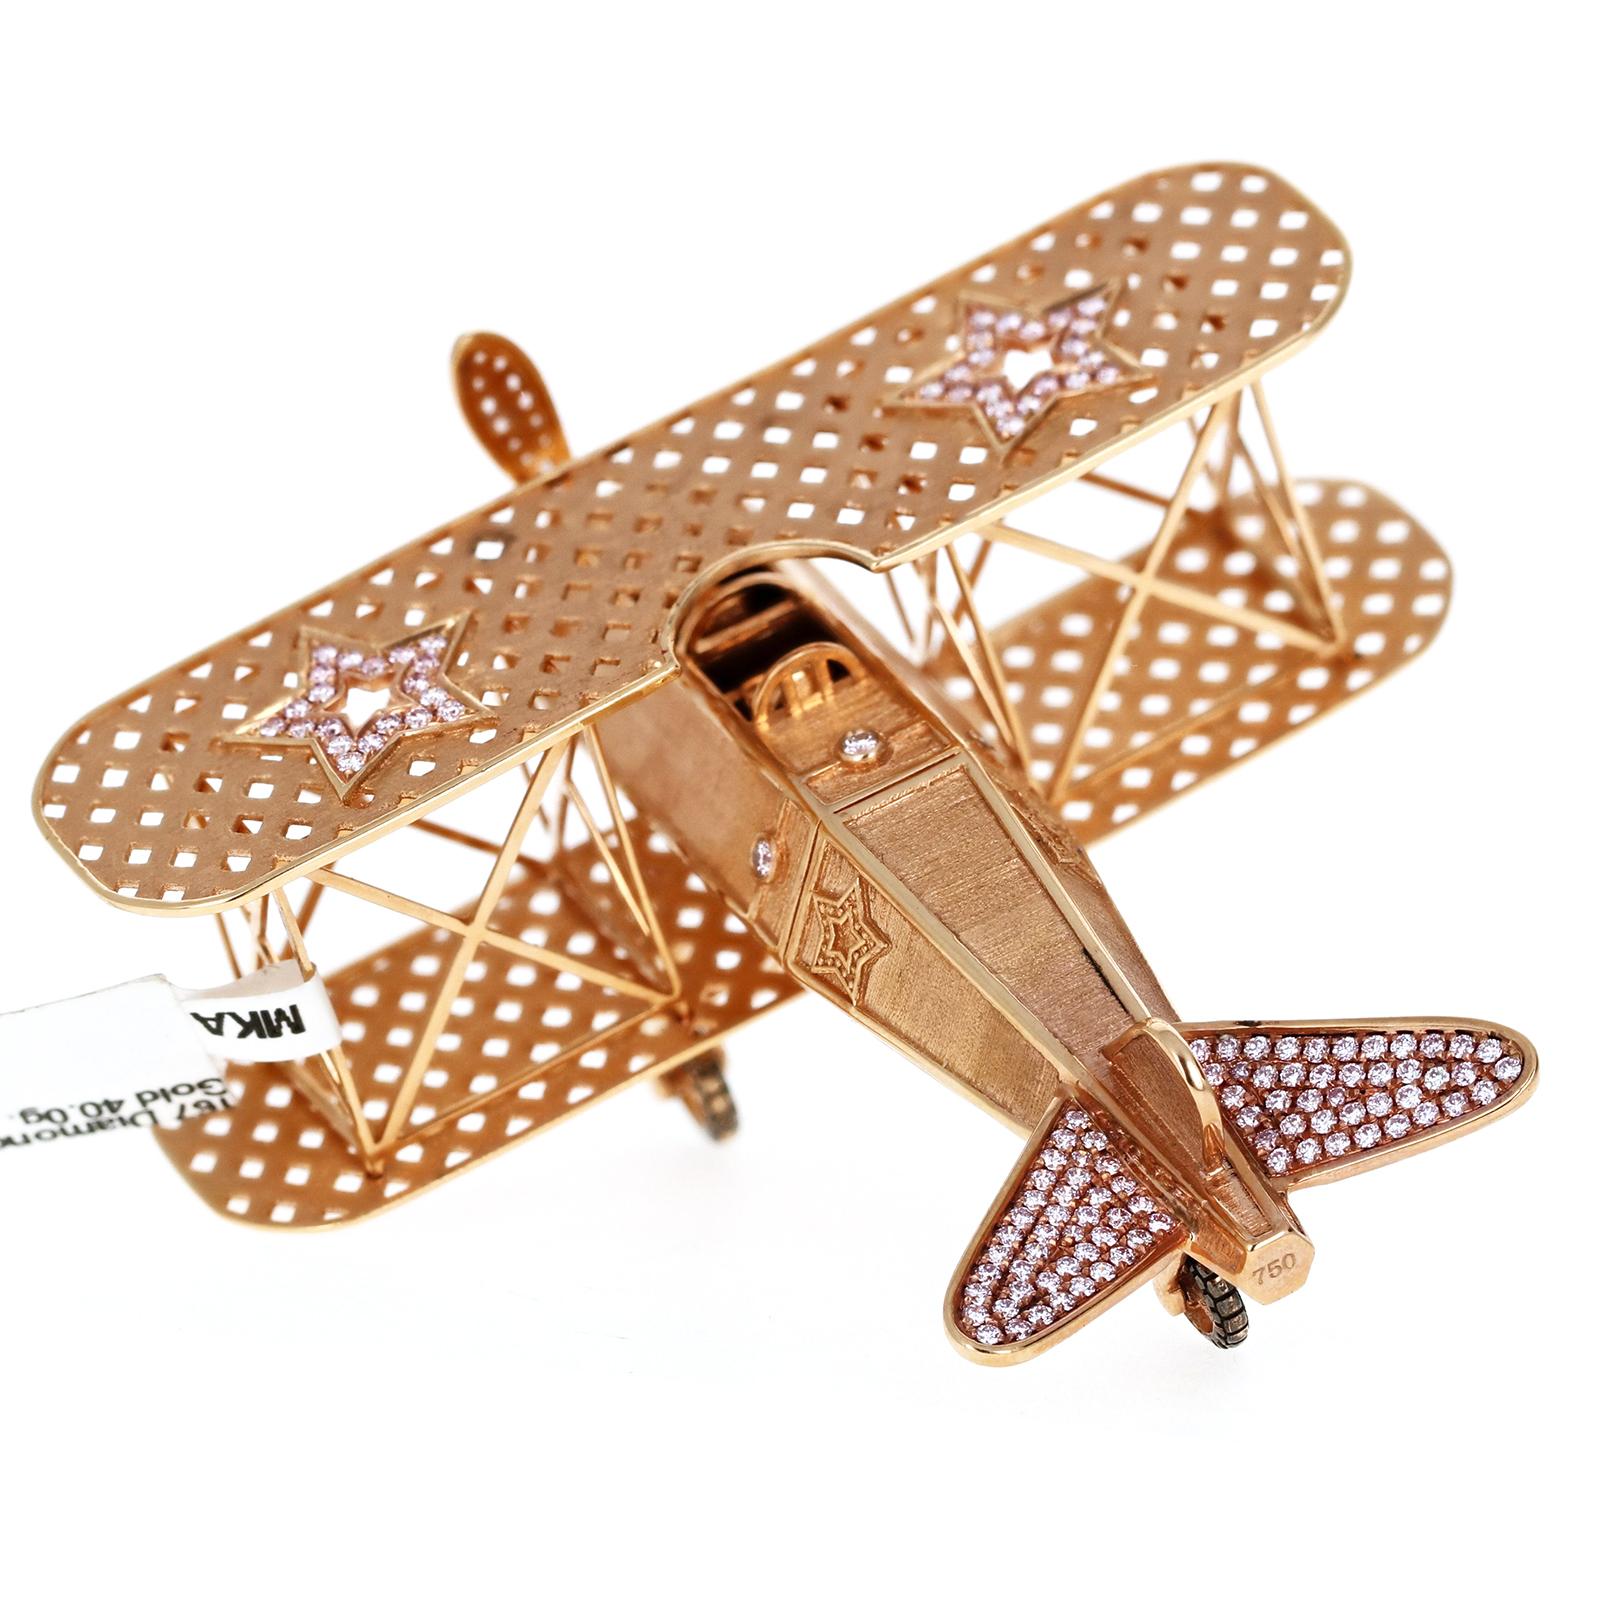 A one-of-a-kind, unique collector's piece made of solid 18-karat rose gold and natural pink diamonds. This Objets d'Art and Vertu has a propeller that spins and wheels that move.
The intricate detail and originality are not only unique but very